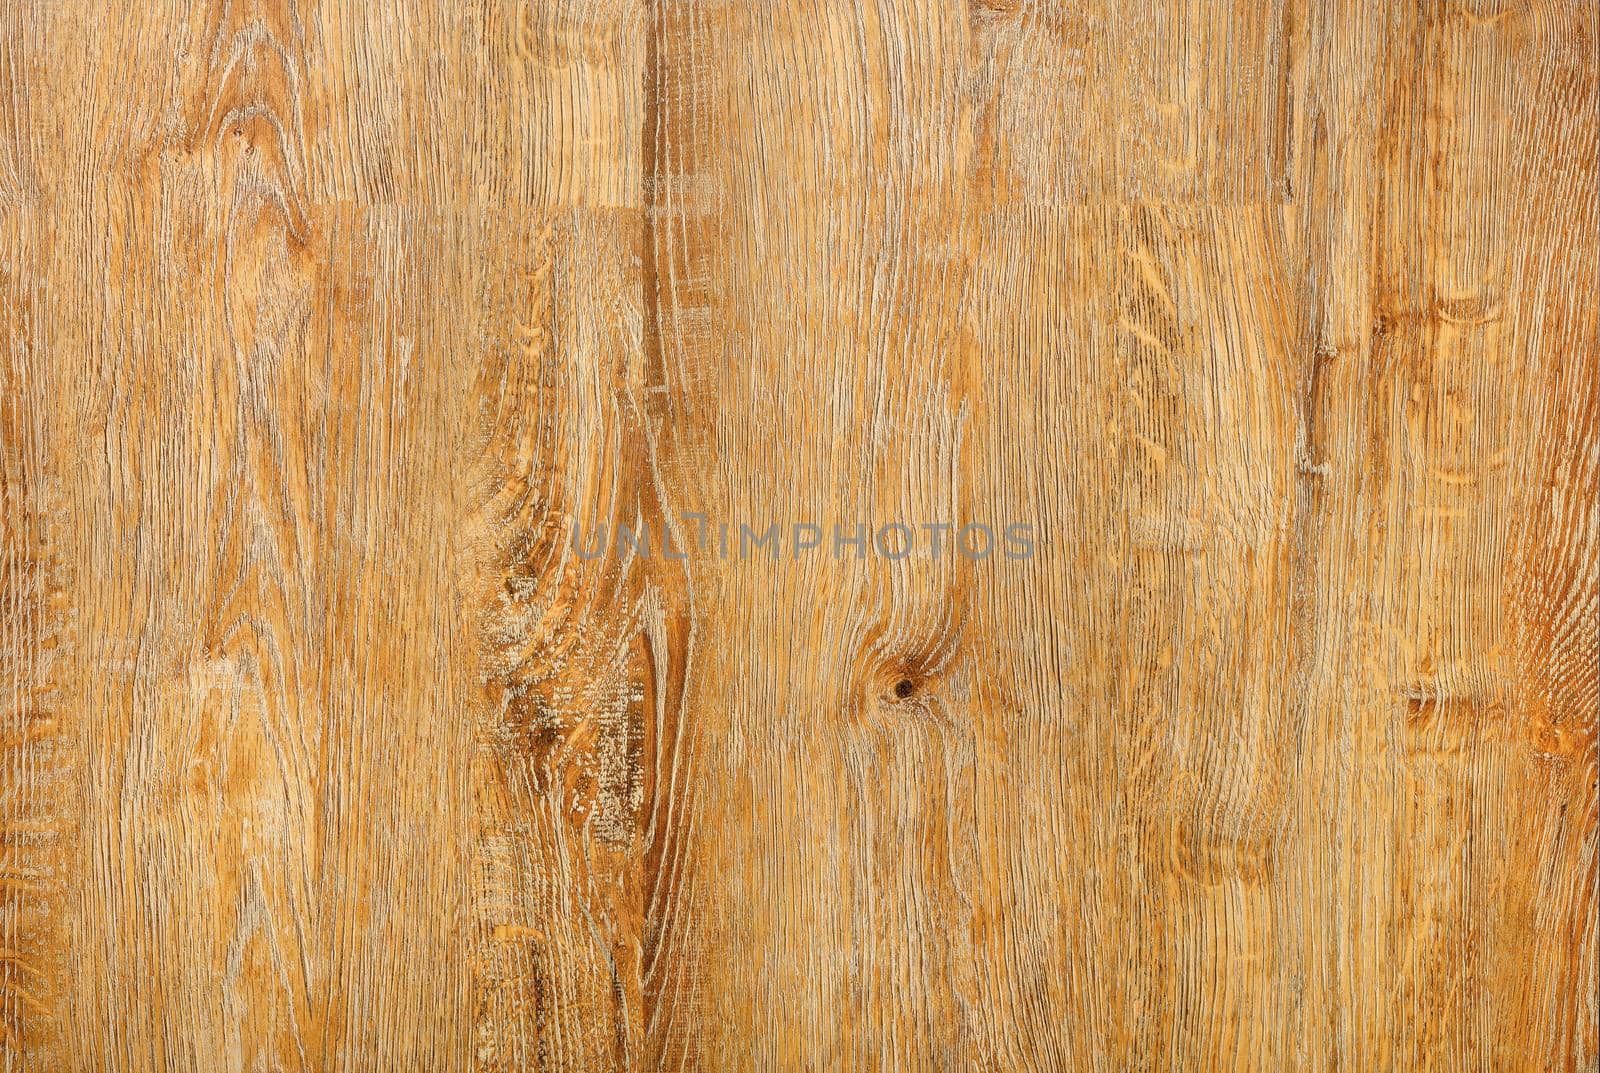 Beautiful texture of a board made of natural light wood with a vertical grain pattern. by Sergii